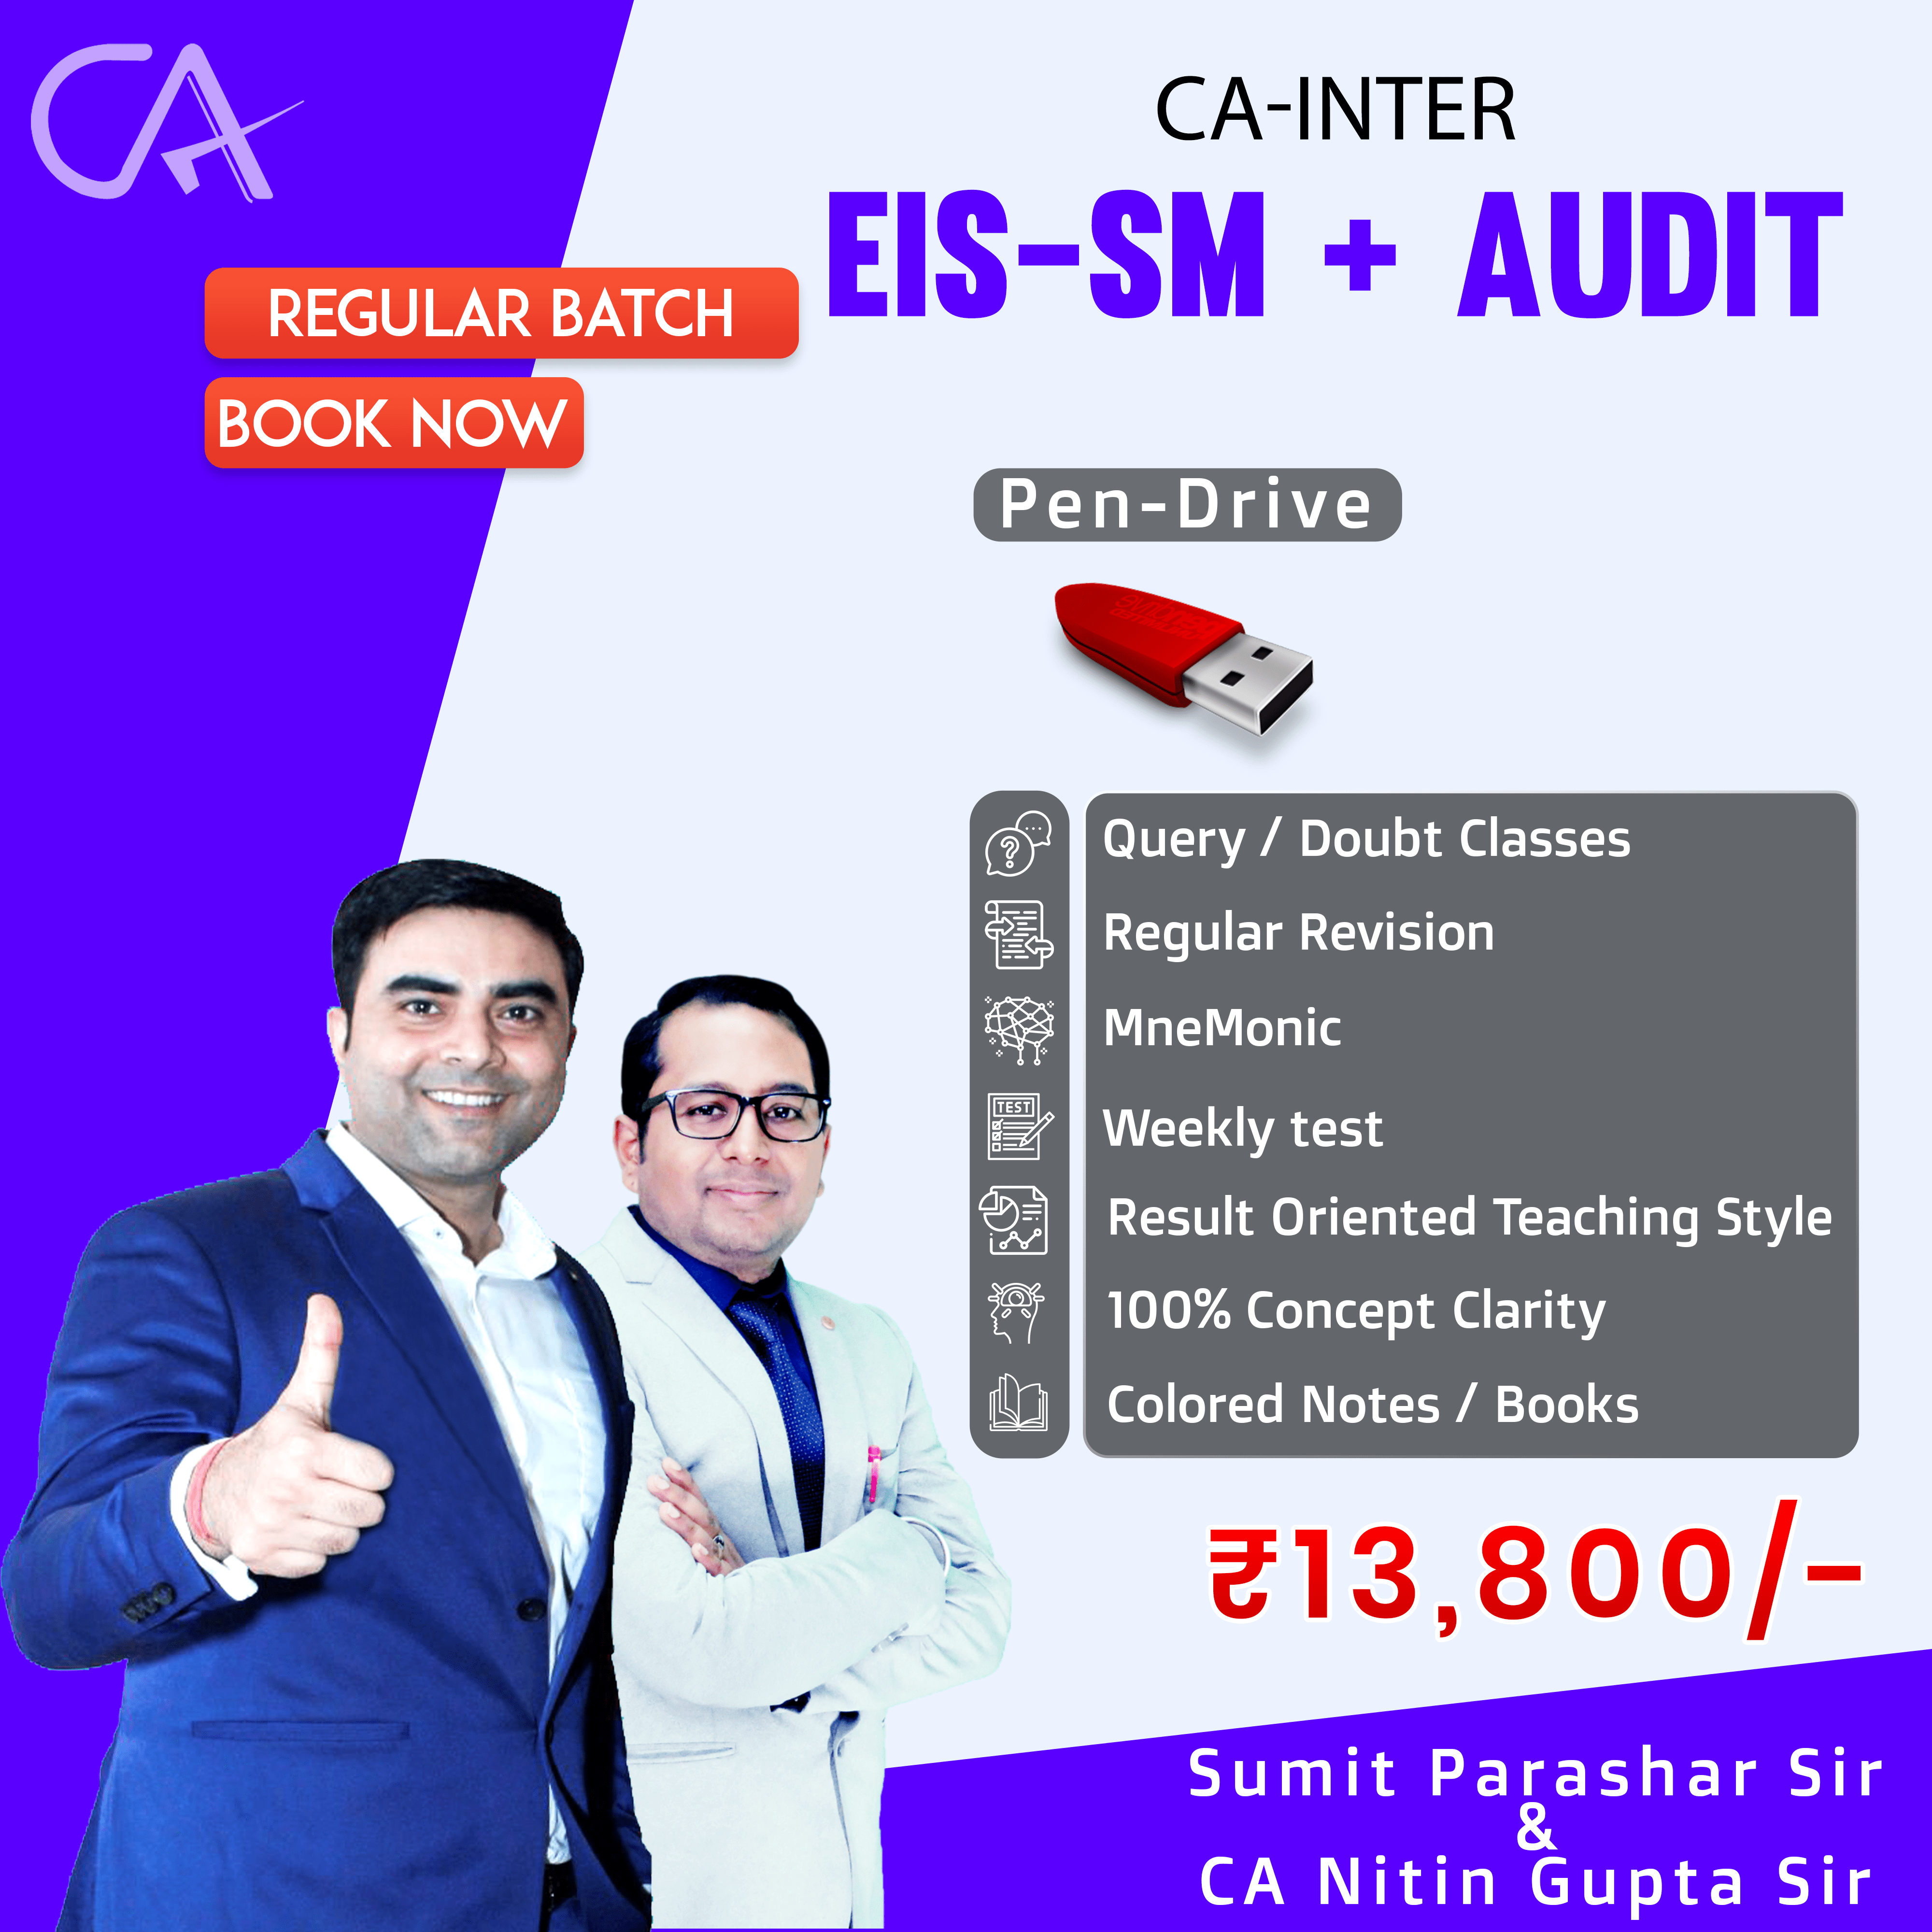 CA-Inter EIS-SM,  Audit & Assurance and Corporate and Other Laws Combo Pendrive Classes by Sumit Parashar Sir and CA Nitin Gupta Sir - Full HD Video Lecture + HQ Sound